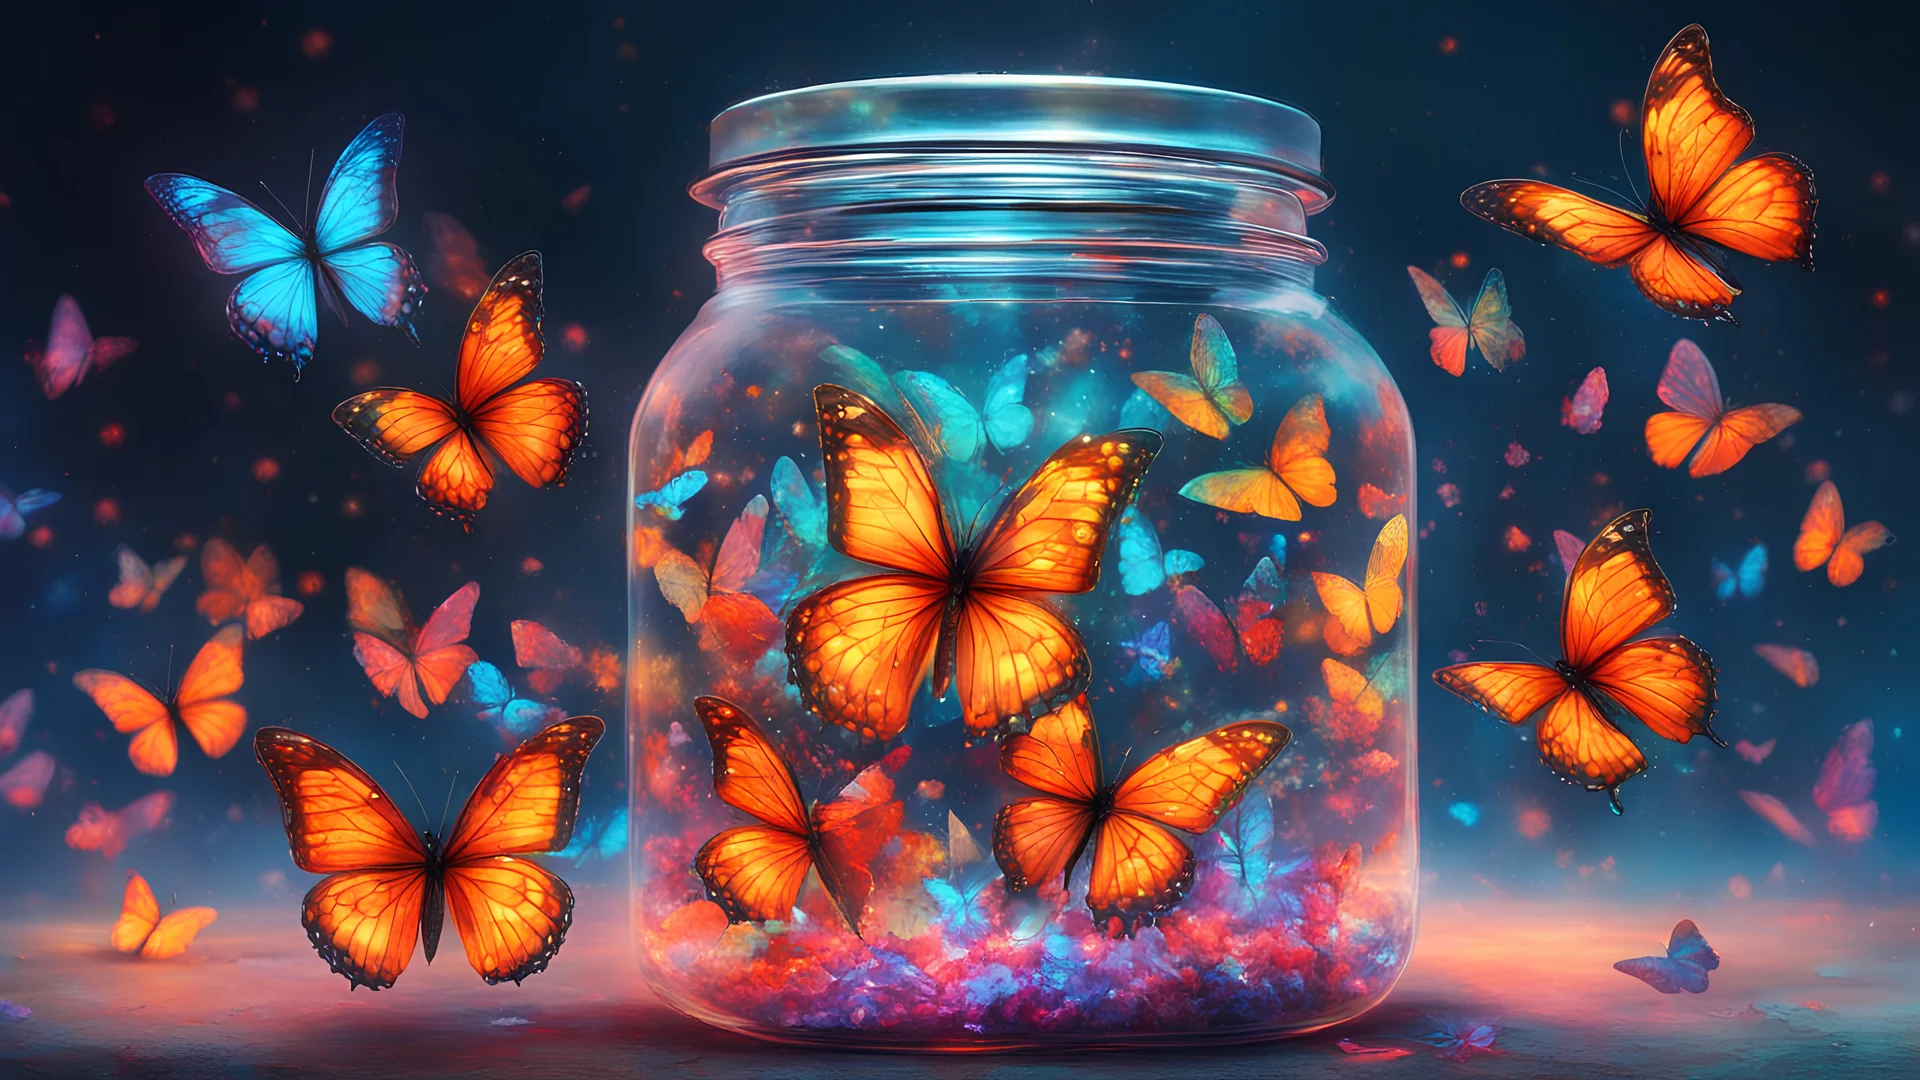 glowing poisonous butterflies jar)))),the quantum panderverse is a decaying reality where forced inclusion is a poison that assumes everything should be made colorful like a circus, because they assume everything is like them and should be like them. Since impressionism and expressionism, the corrupted idea of freedom is a concept that creates war, becoming the true apocalypse of modernity. Only a few dare to fight the tricky dementors who feed from other emotions like astral specters; these fac